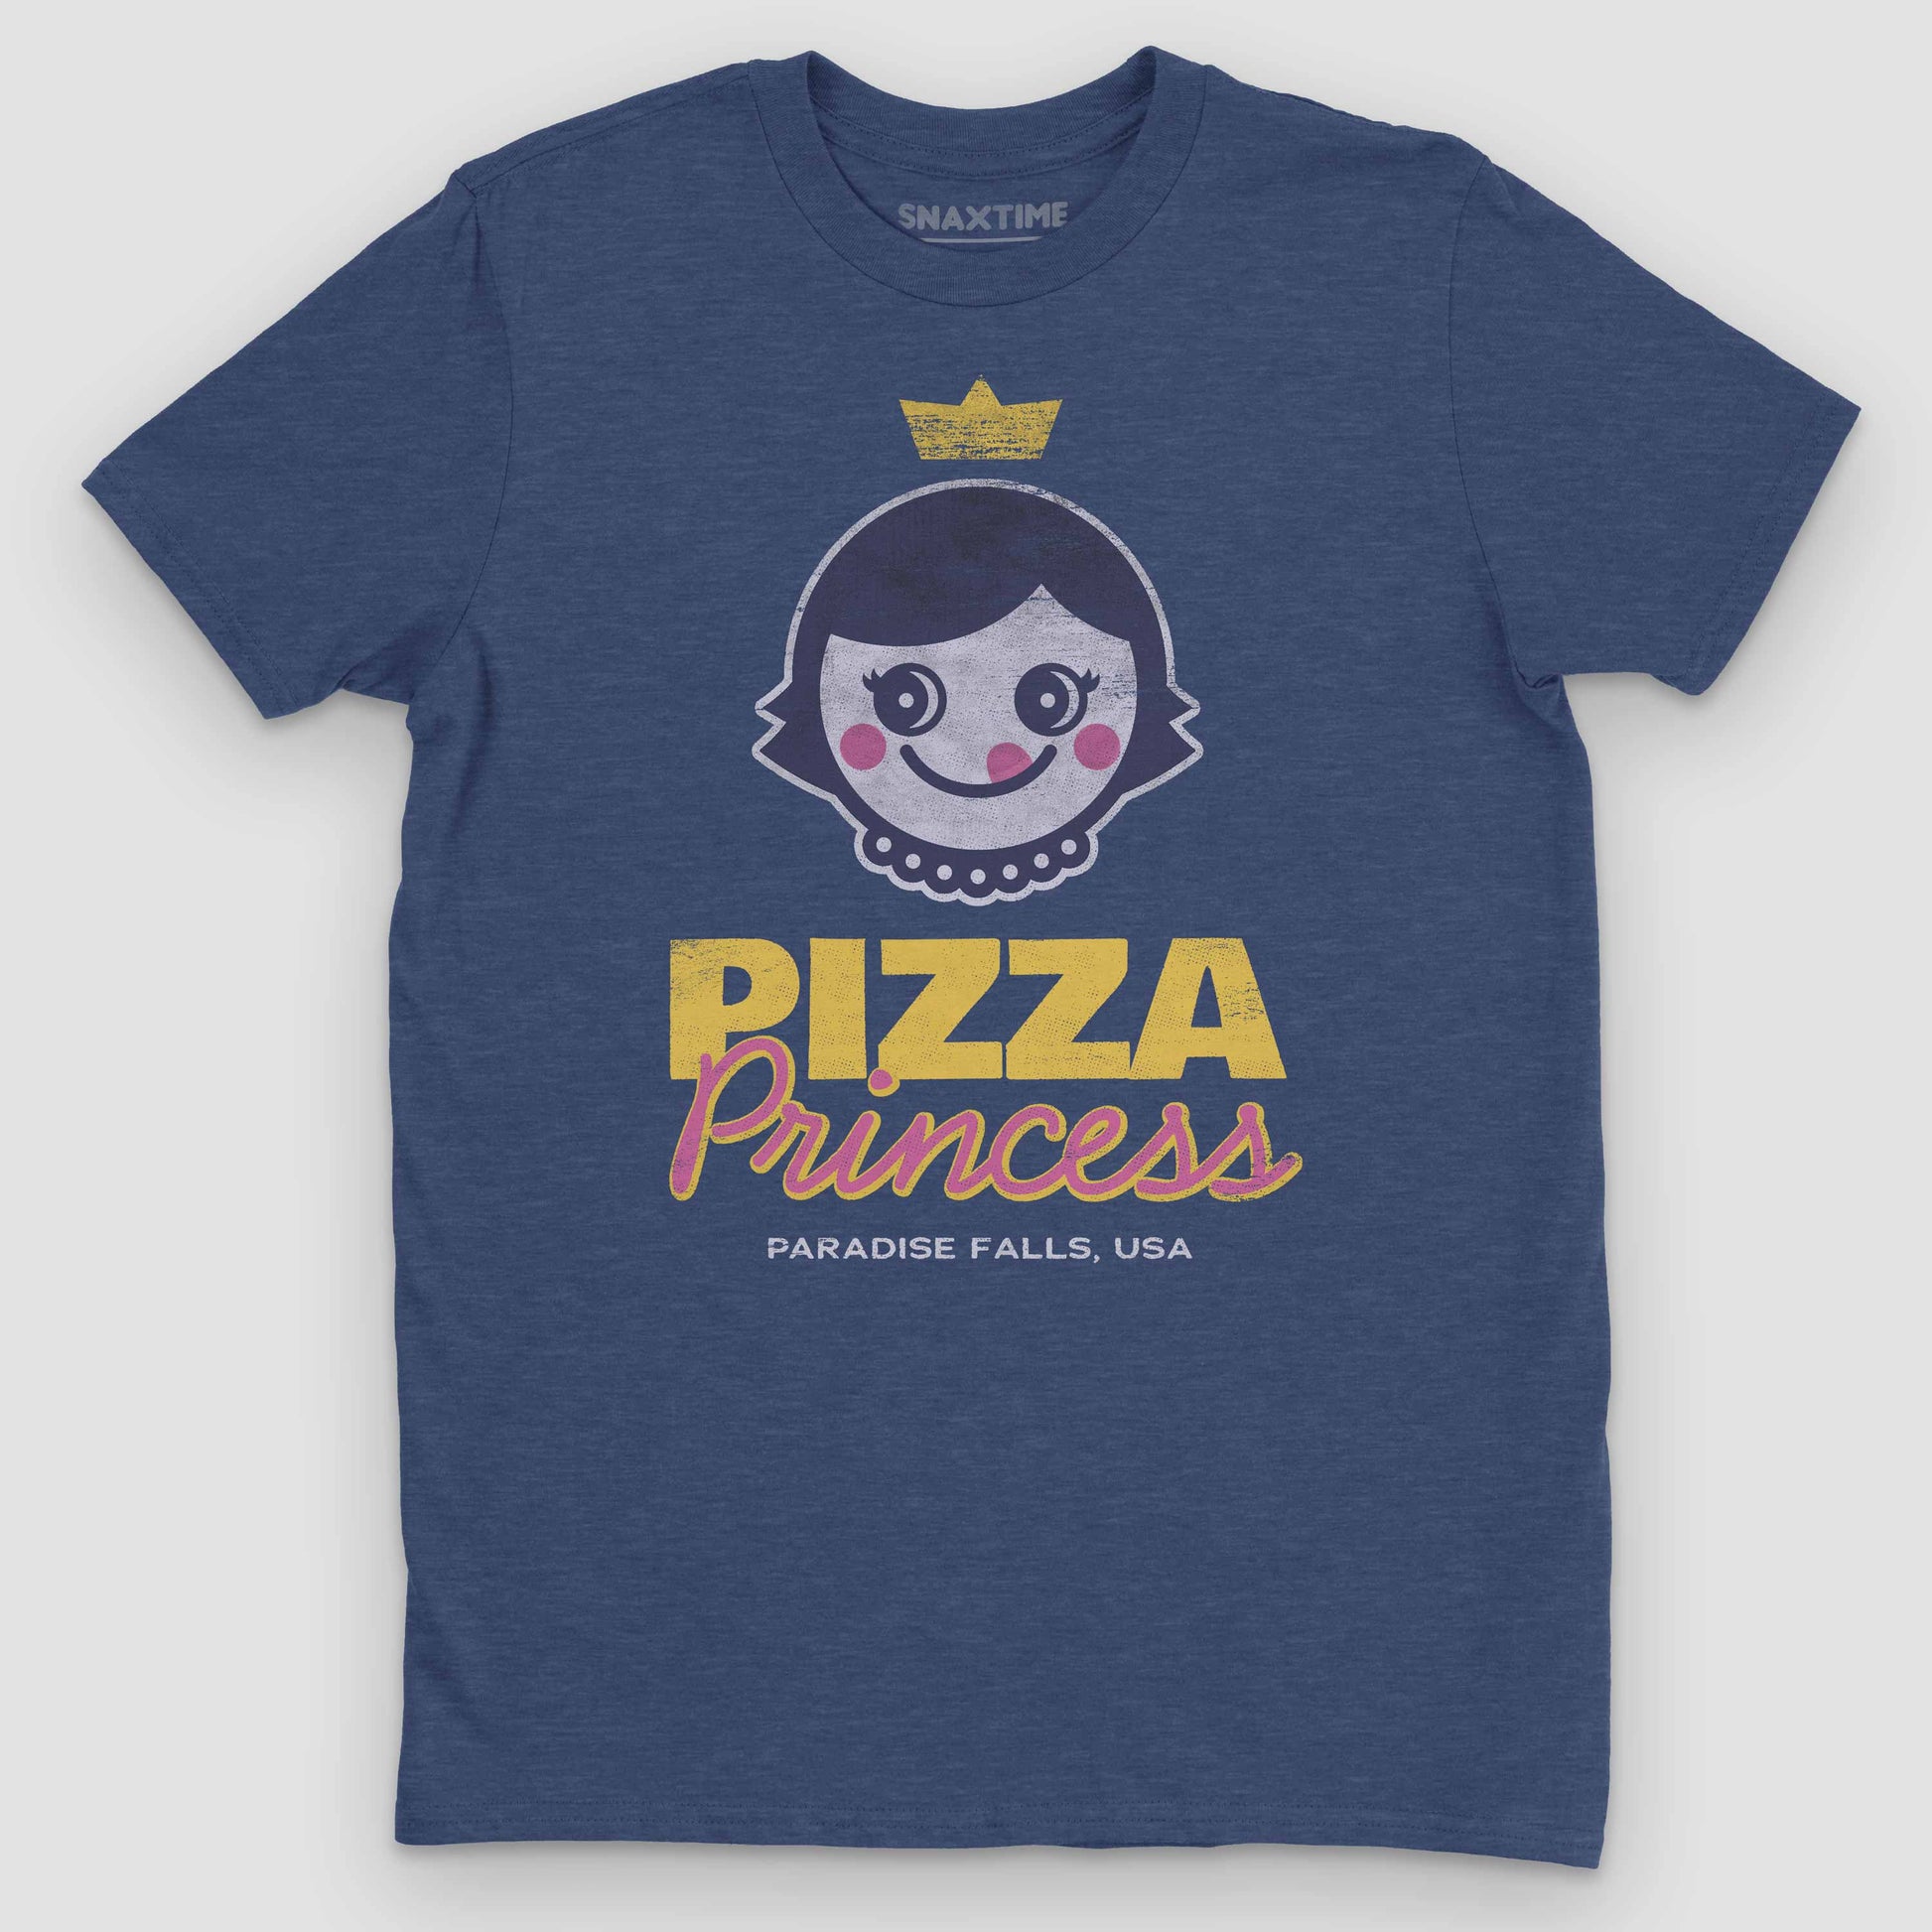 Heather Blue Pizza Princess Graphic T-Shirt by Snaxtime